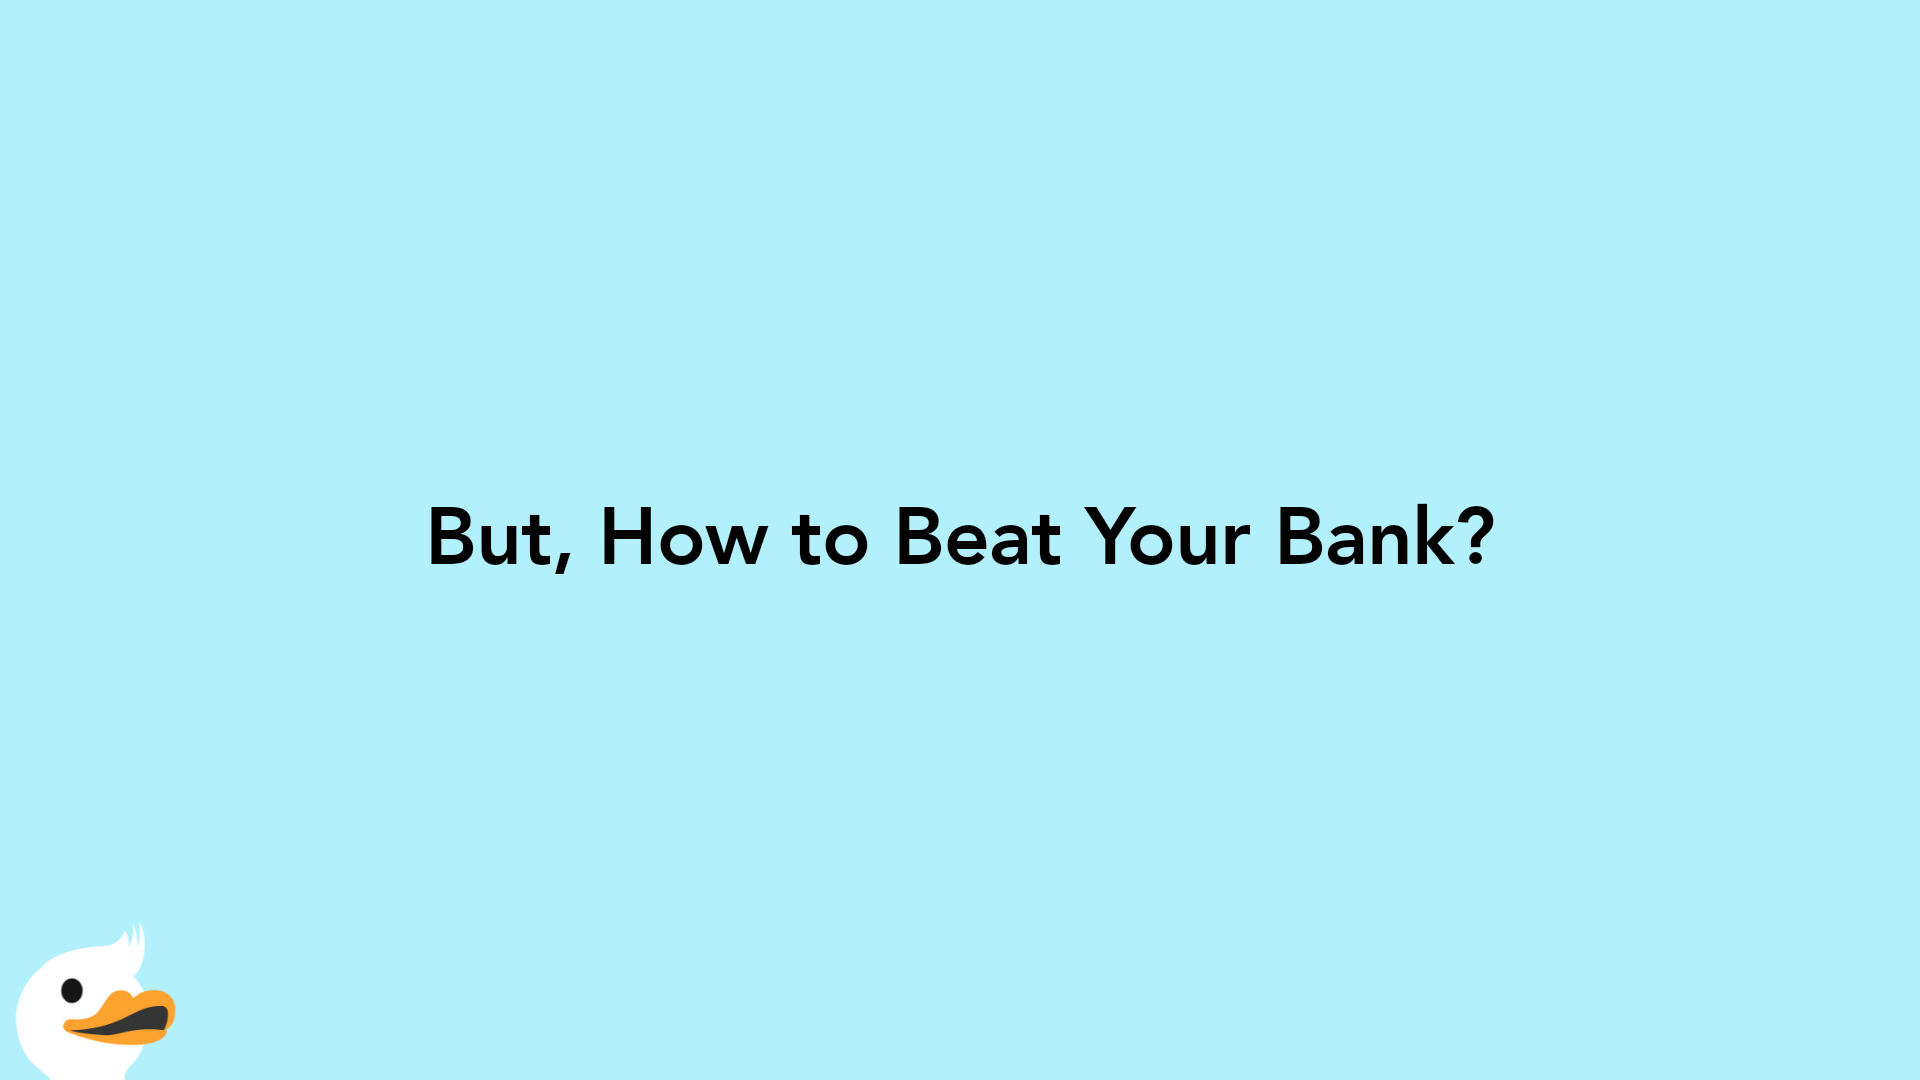 But, How to Beat Your Bank?